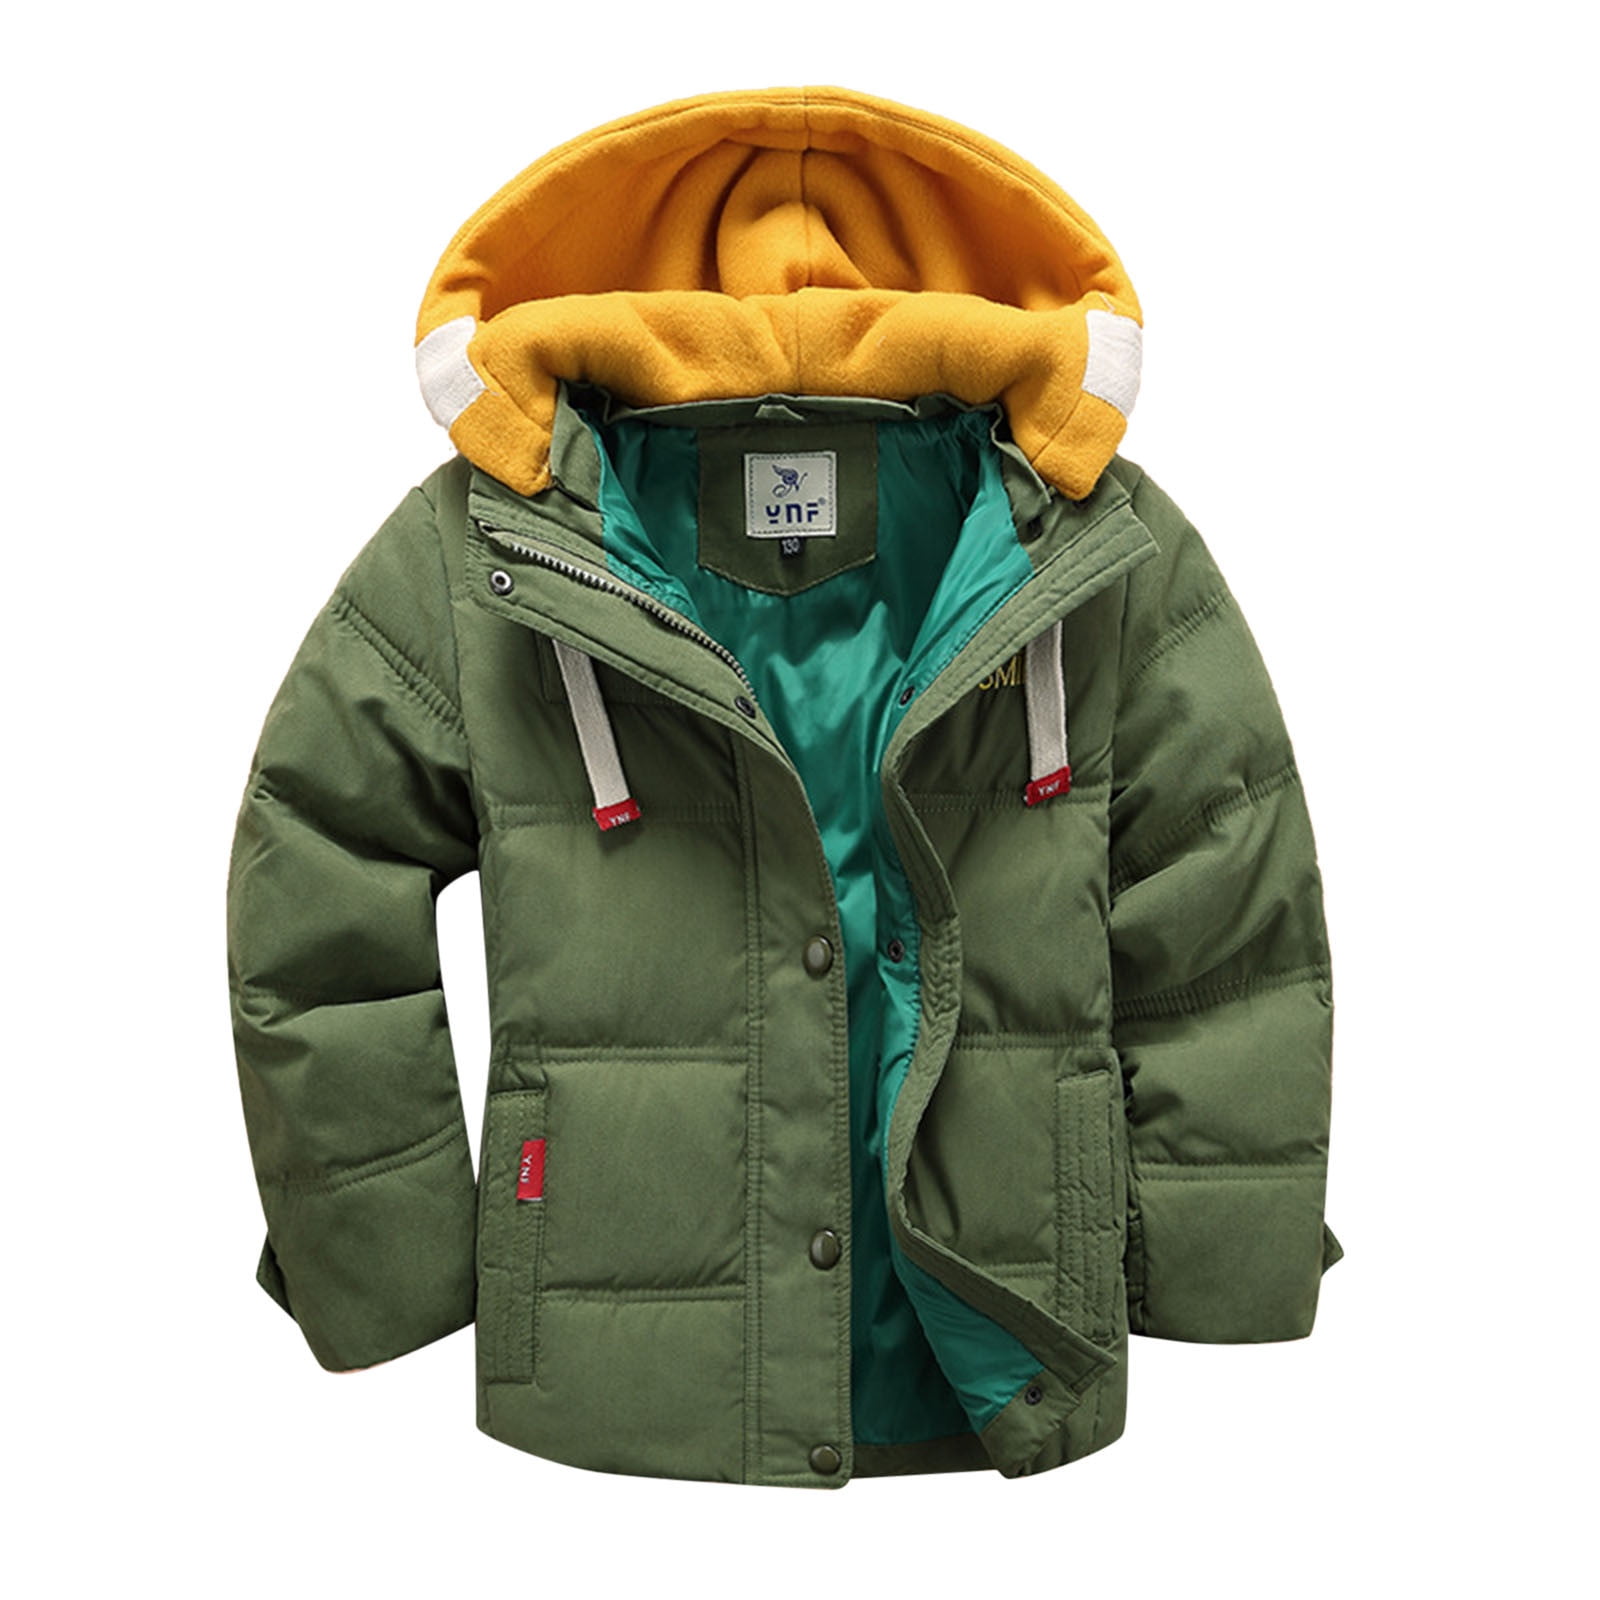 Army Green Padded Winter Jacket For Boys With Removable Fur And Hood Thick  And Warm Baby Outwear From Kukuson, $17.49 | DHgate.Com